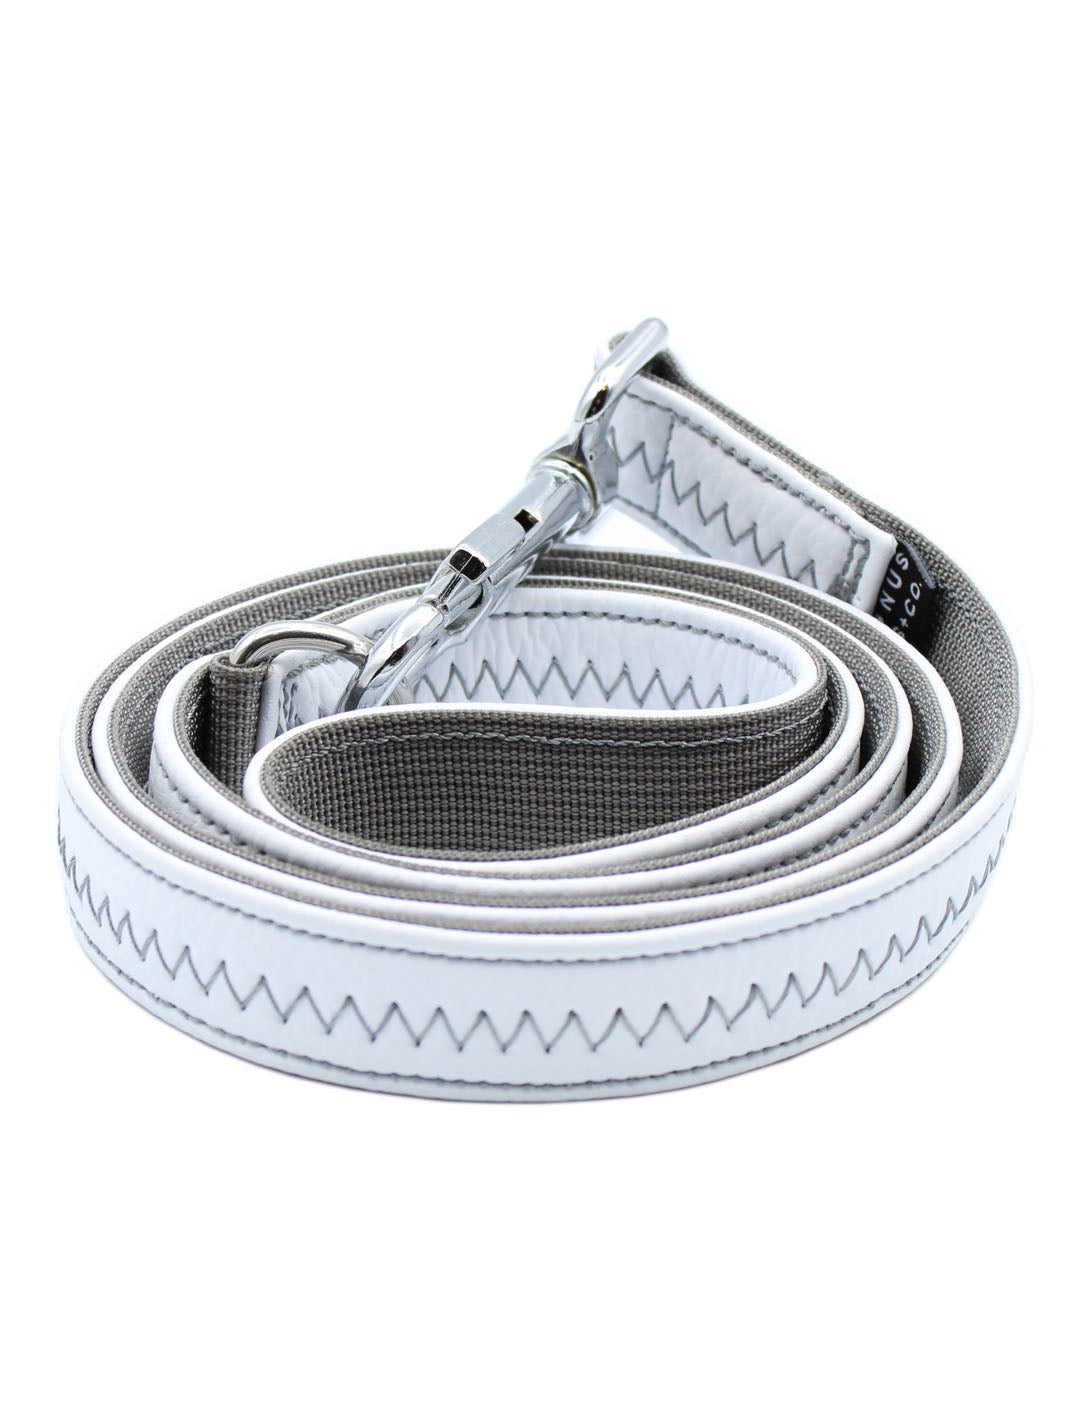 A white vegan leather hand crafted dog leash by MAGNUS Canis.